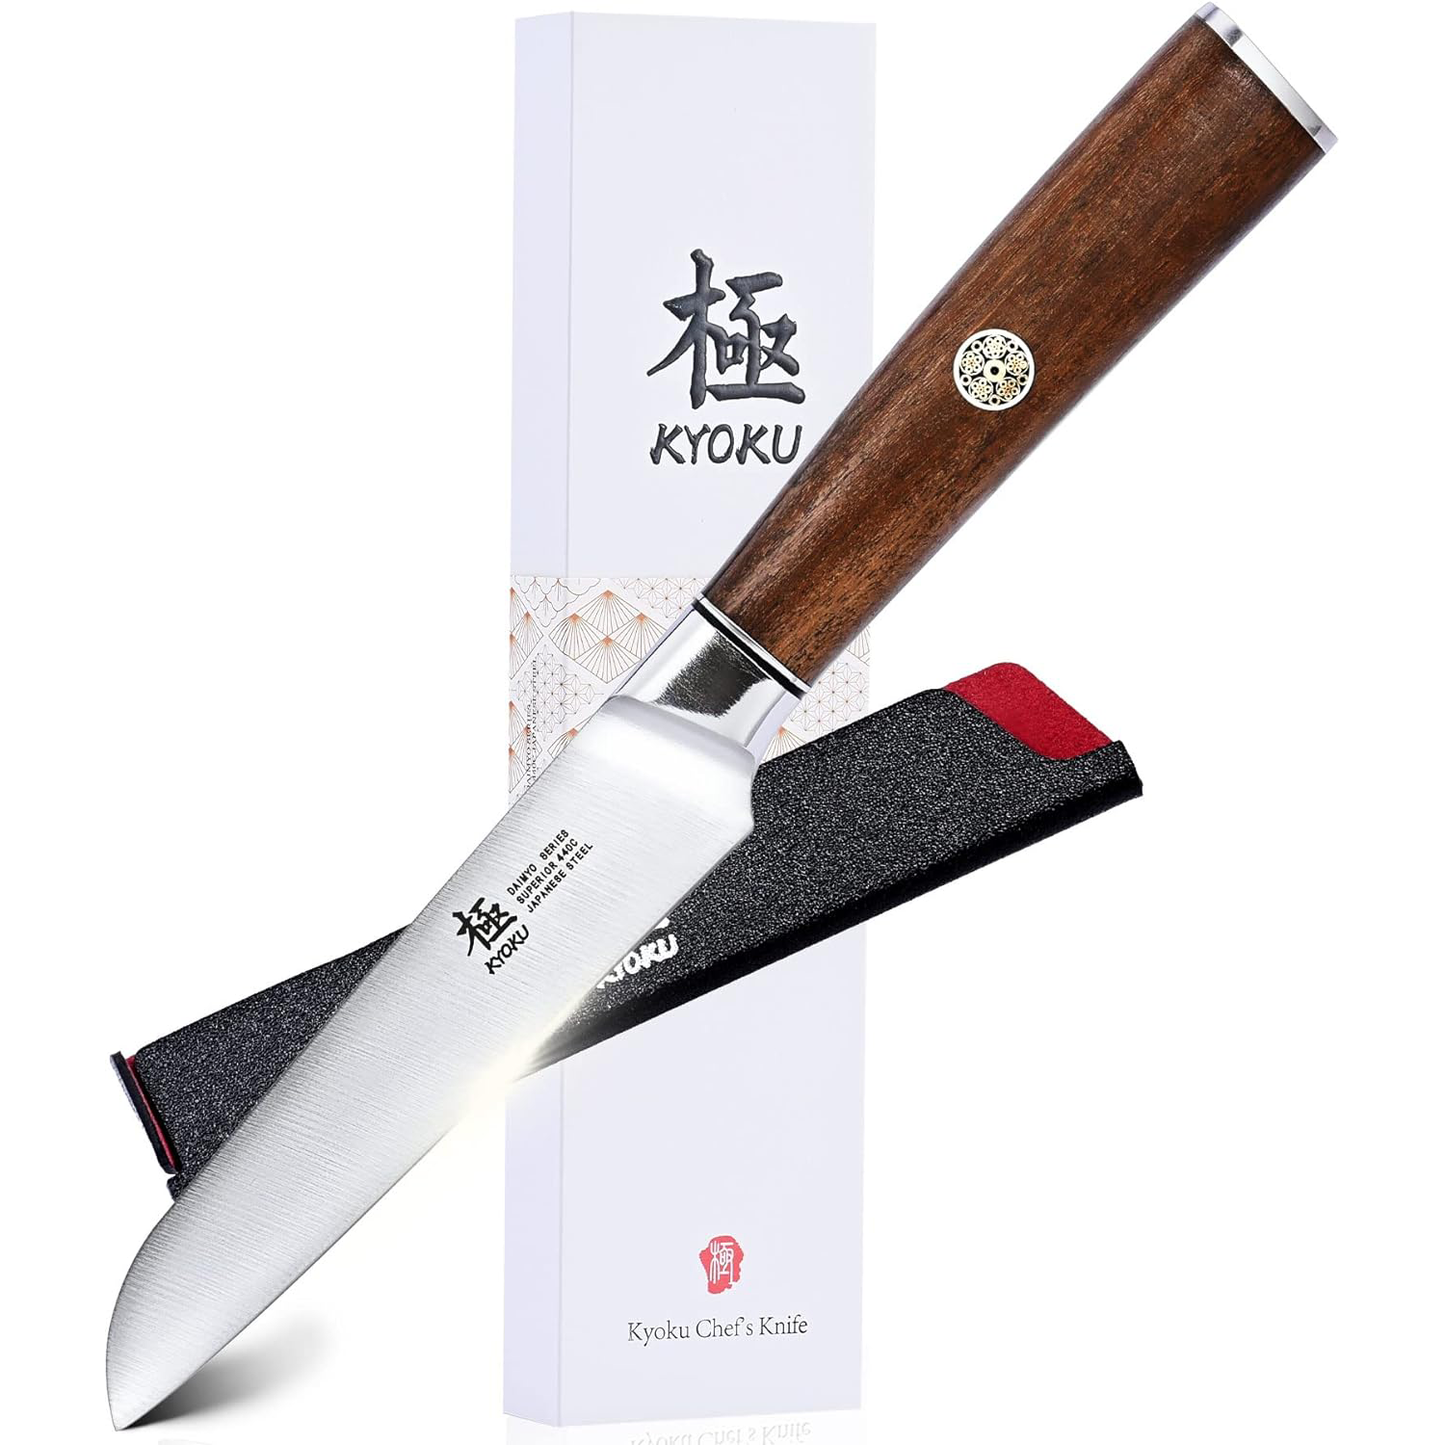 KD 4.5" Paring Knife Japanese 440C Stainless Steel Kitchen Knife with Sheath & Box